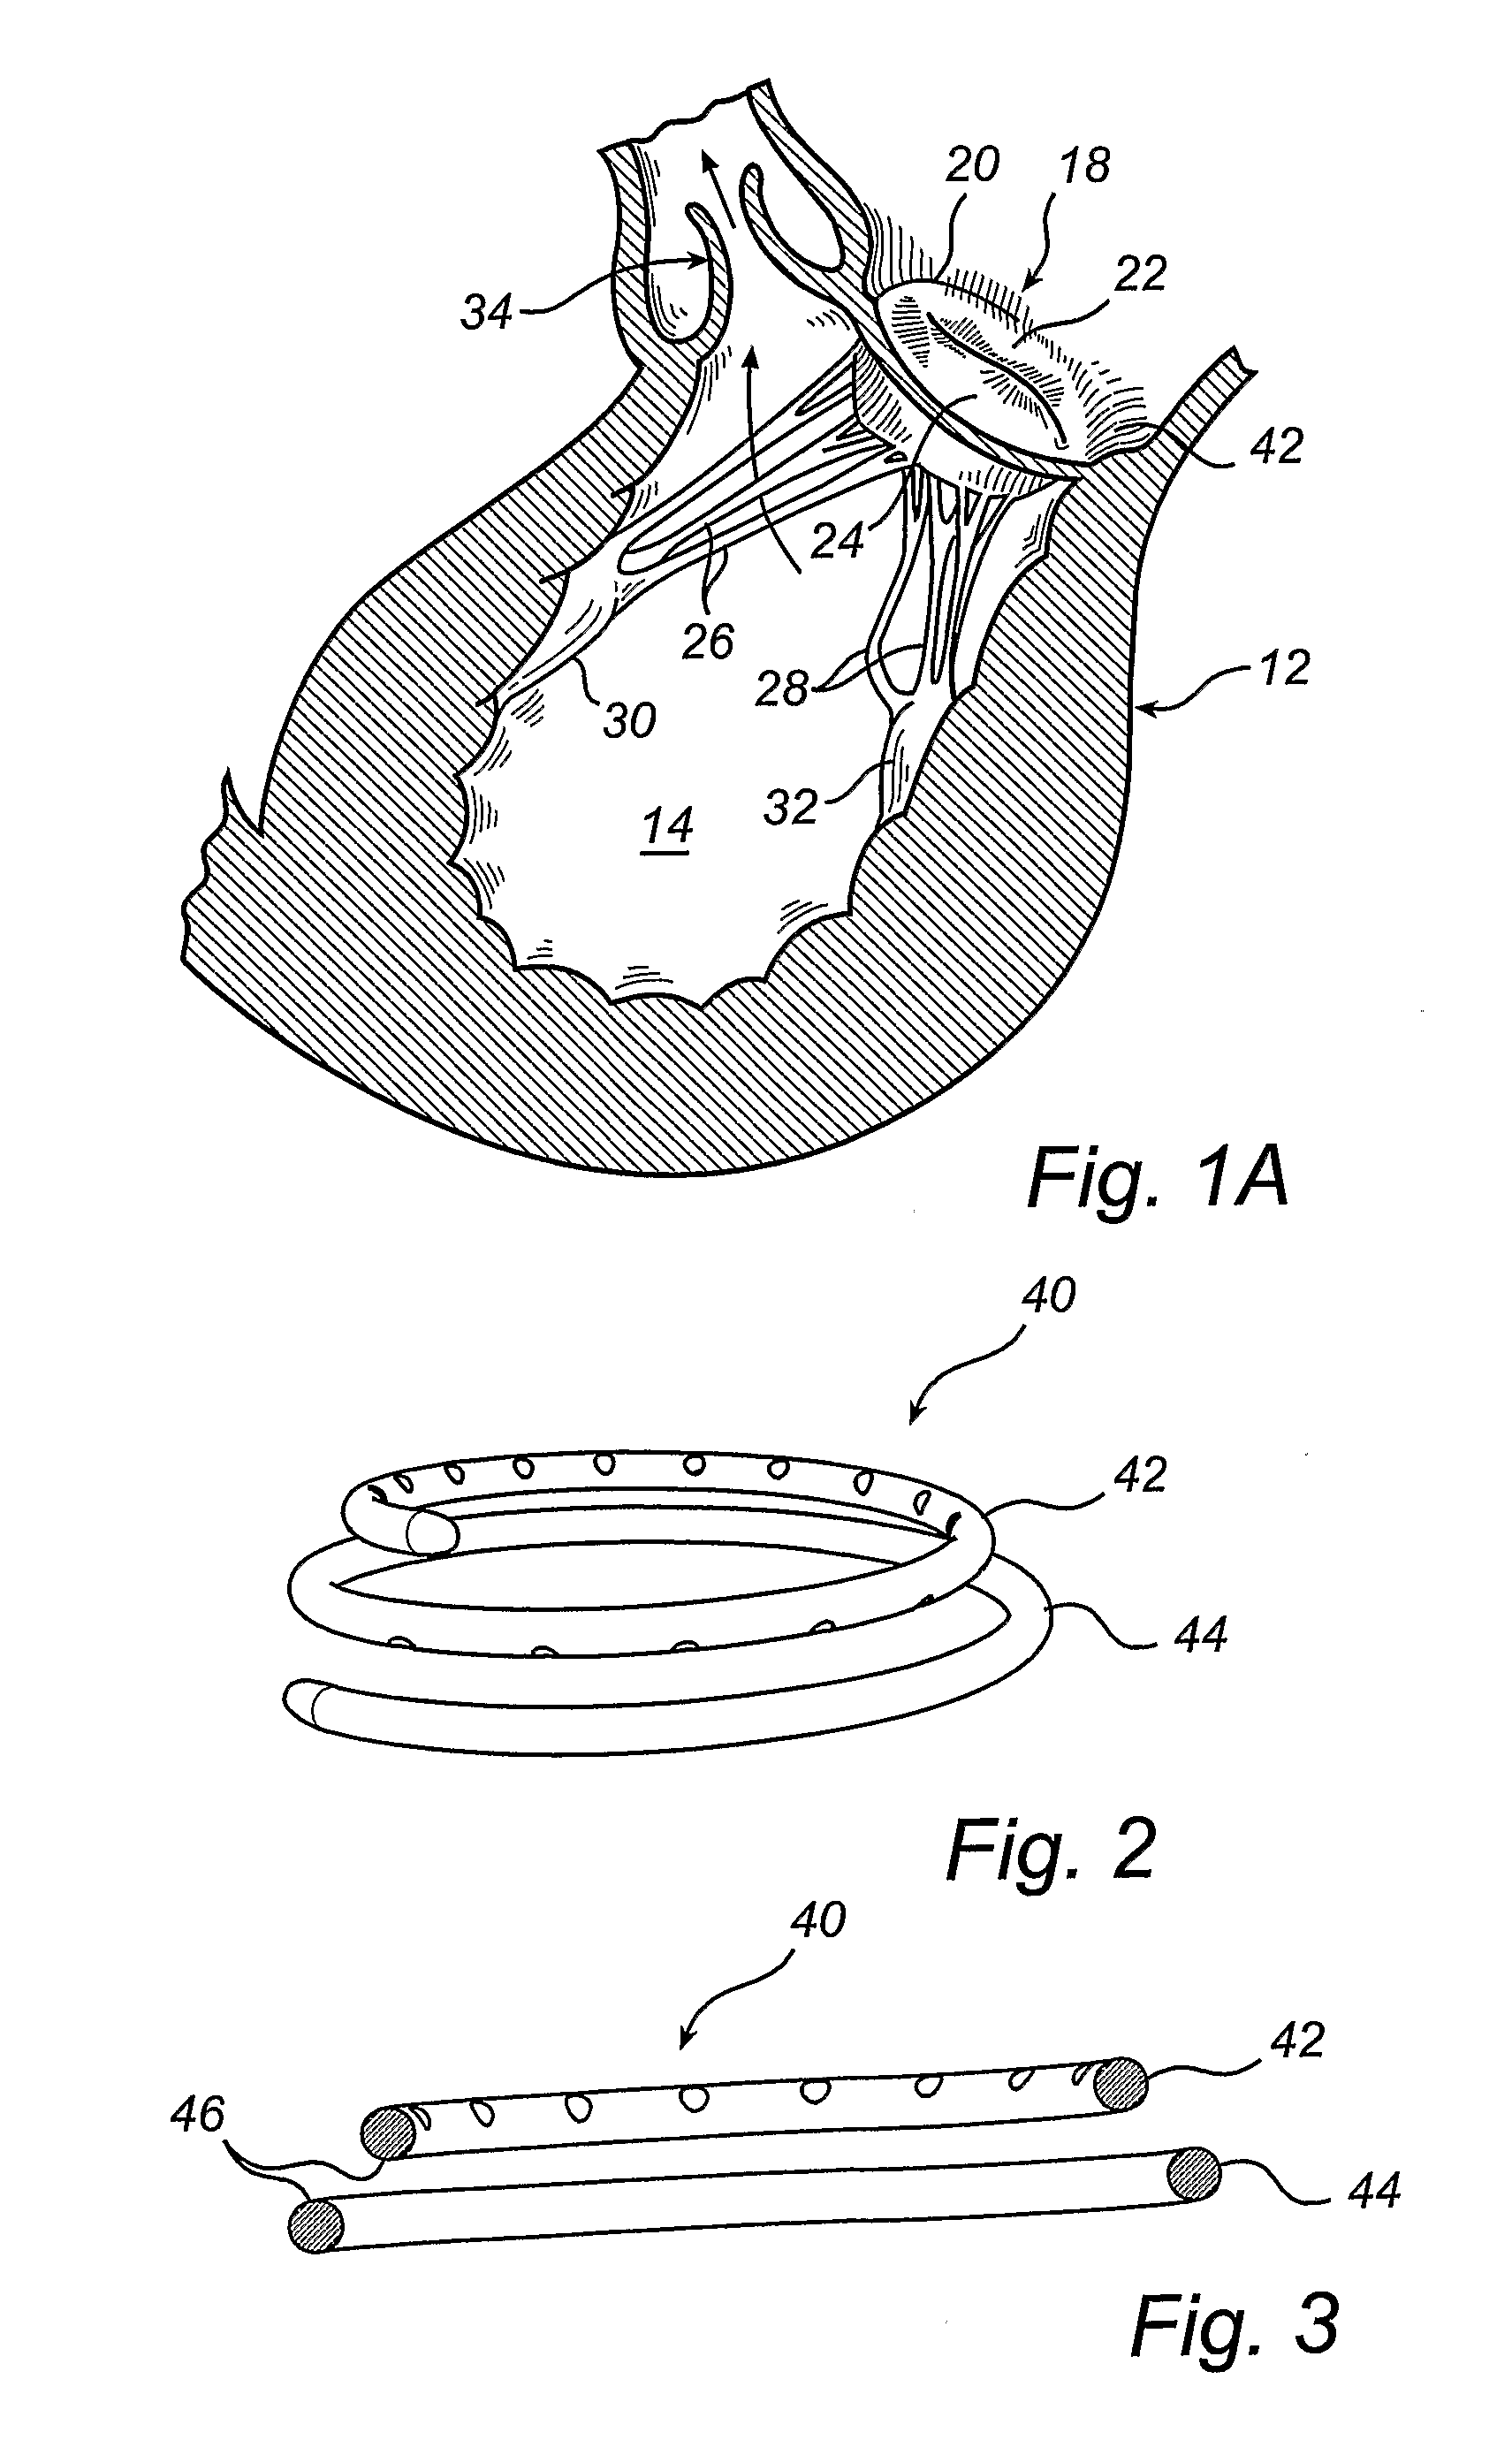 Devices and a Kit for Improving the Function of a Heart Valve